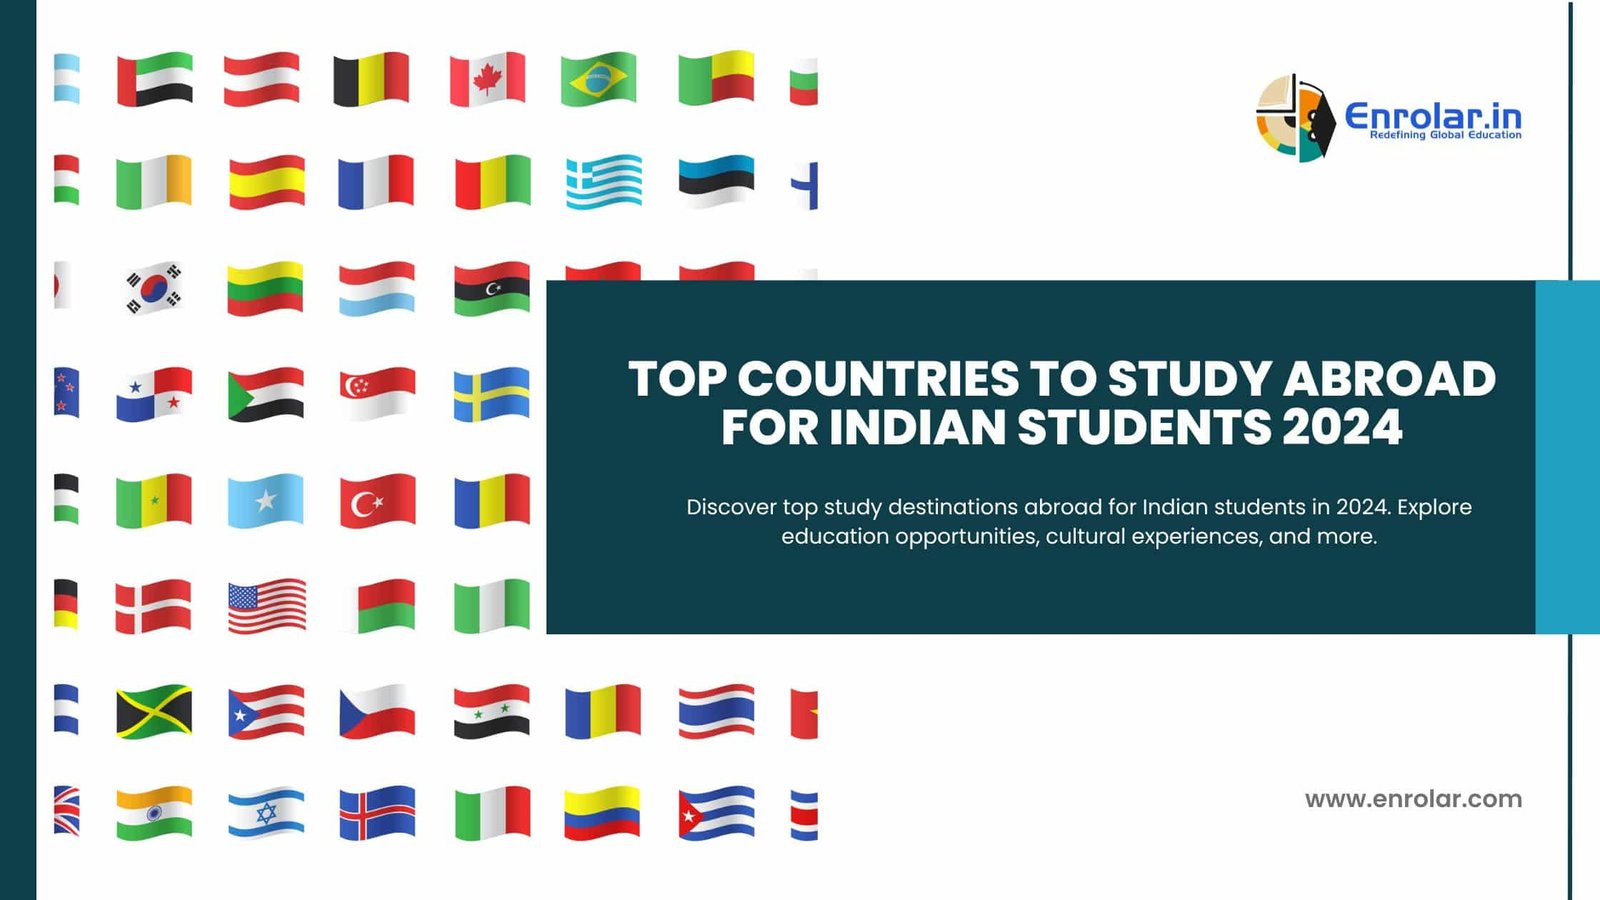 Top Countries to Study Abroad for Indian Students 2024